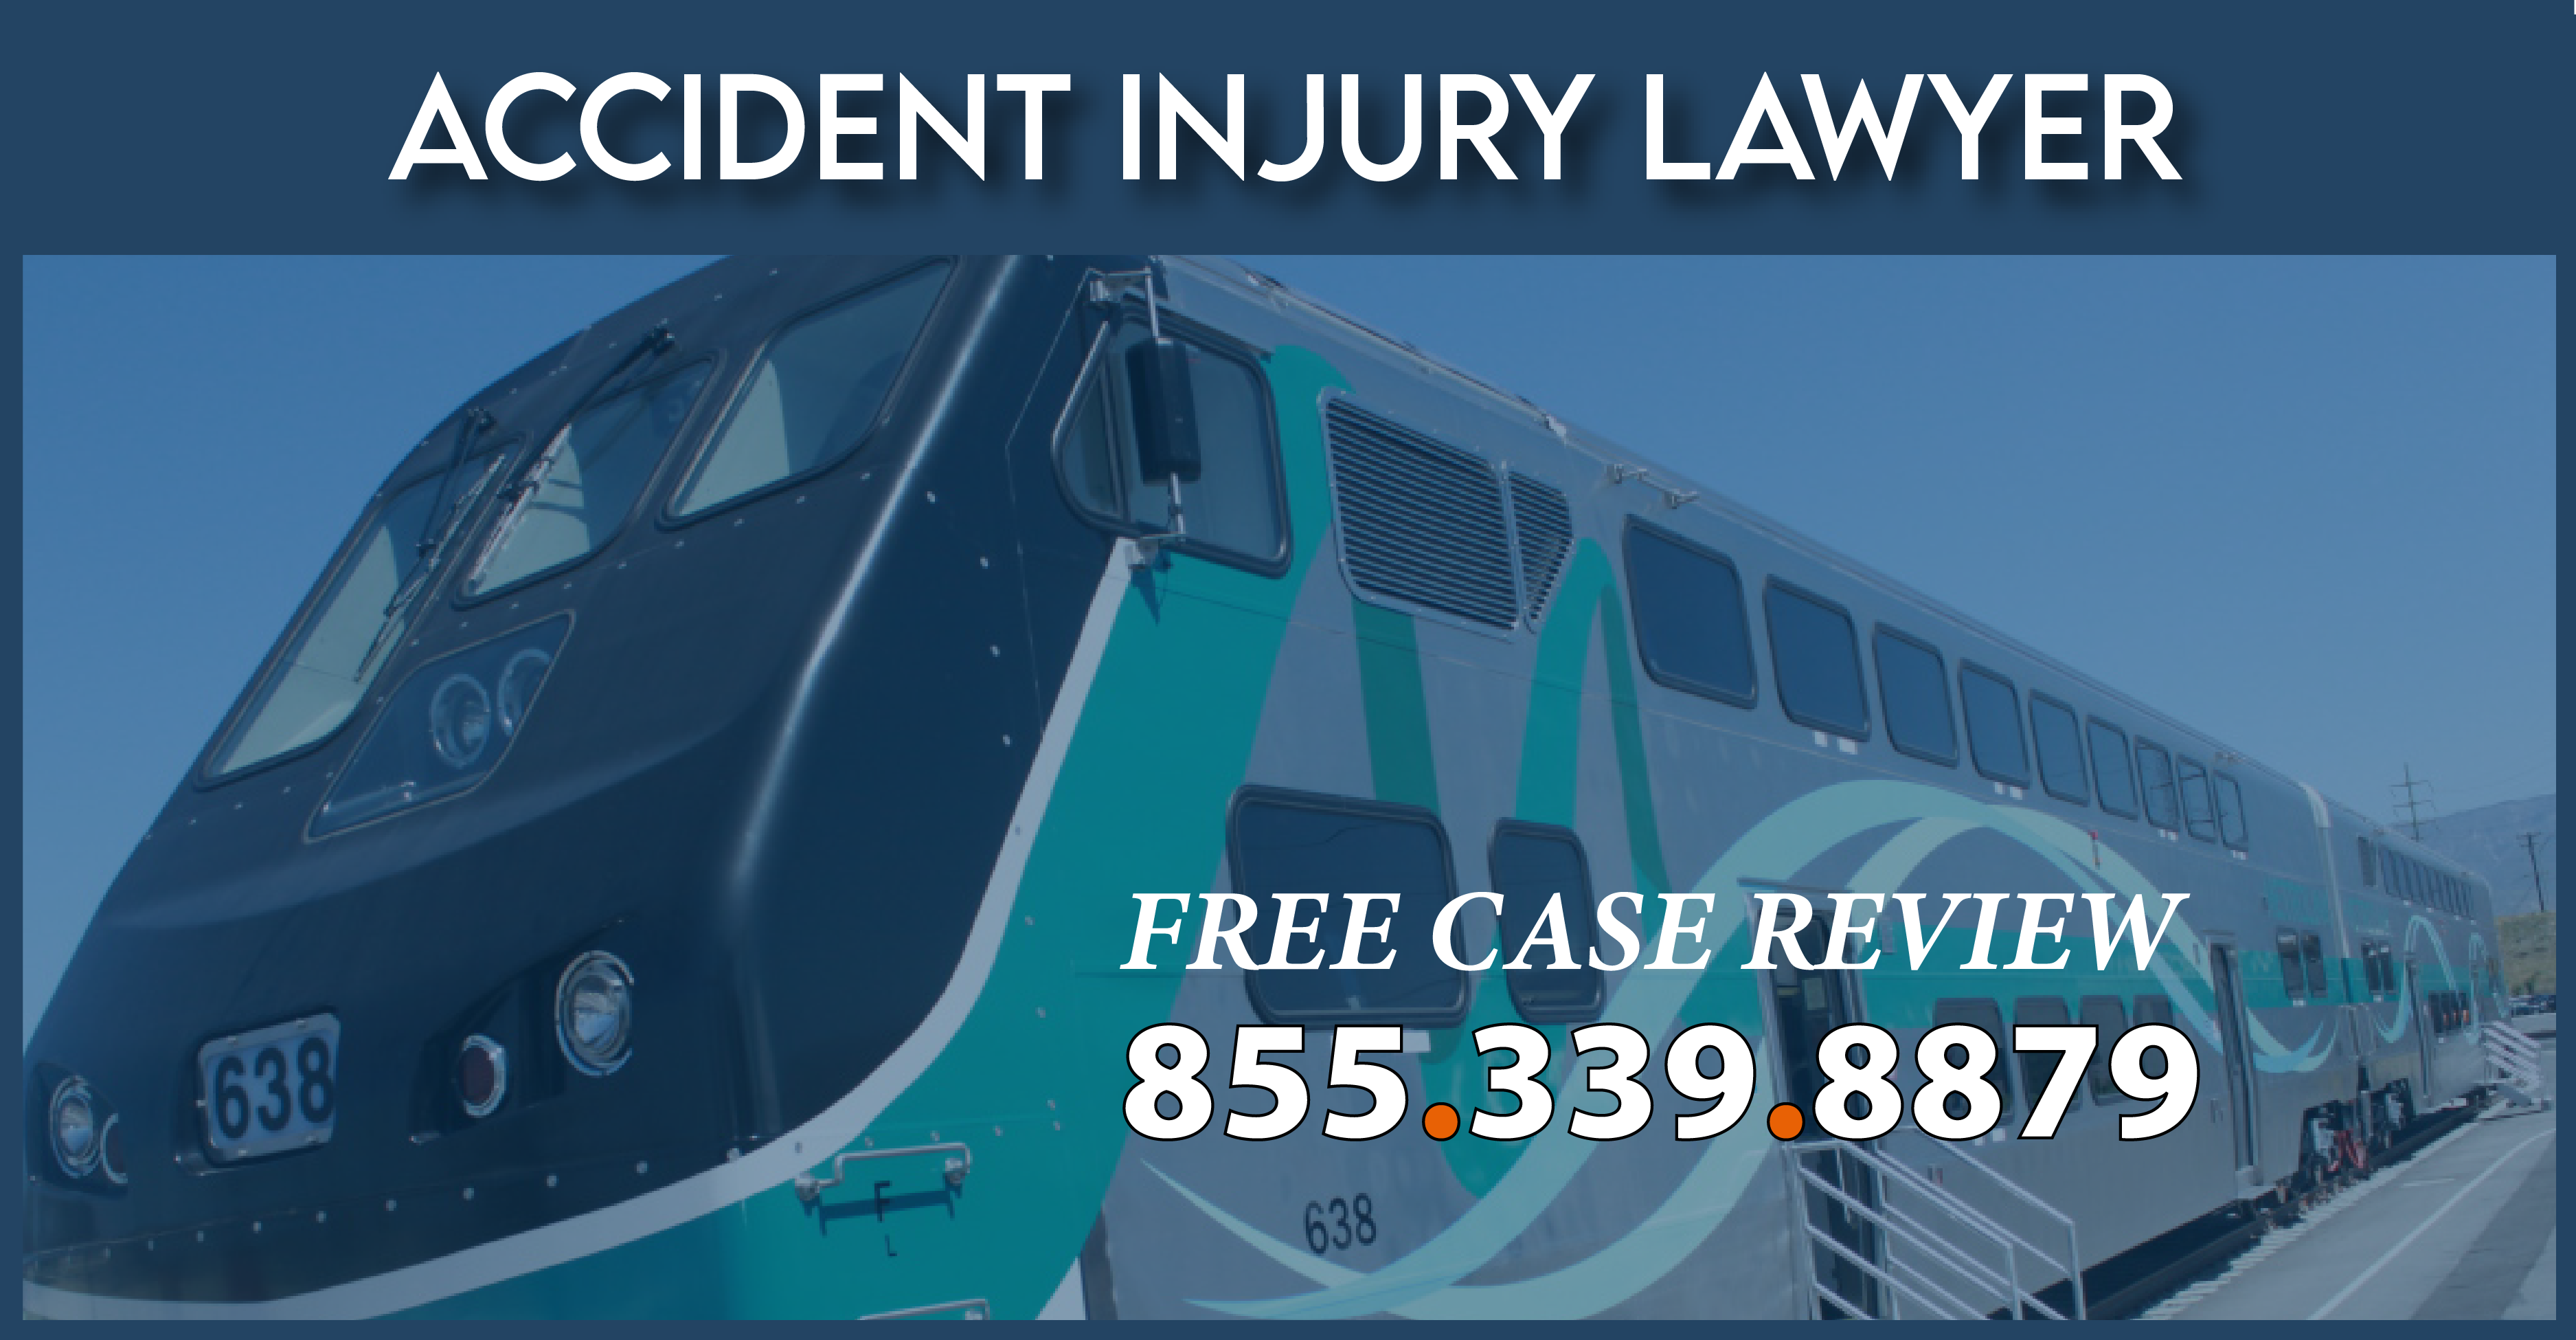 metrolink train accident injury lawyer premise liability incident compensation